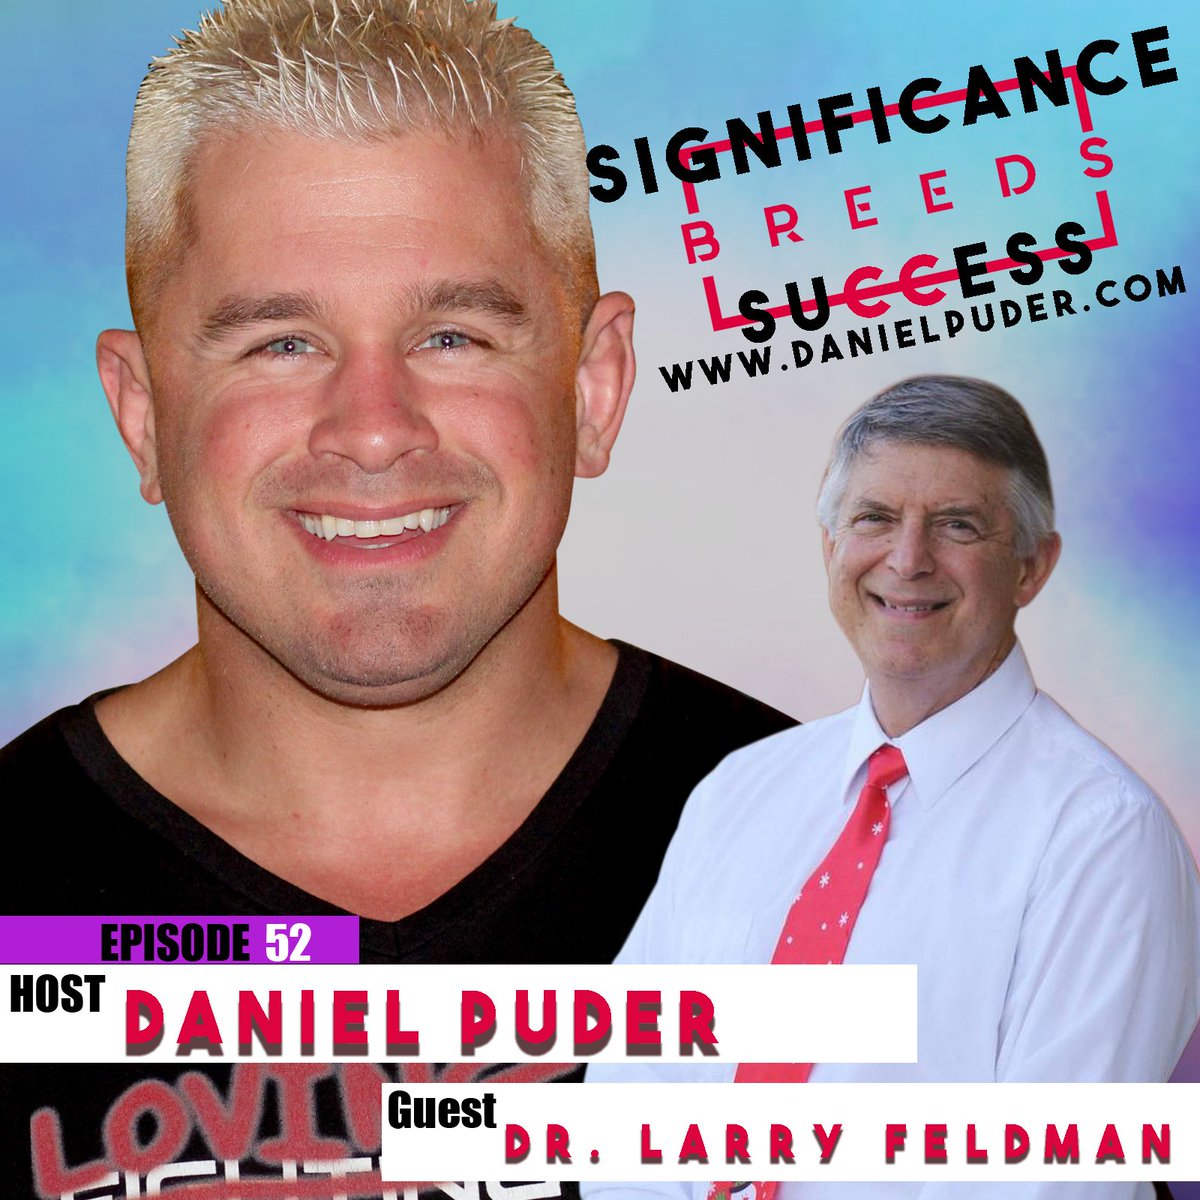 Daniel Puder | Dr. Larry Feldman | The Learning Process| #podsessions #52 The direct Link is: spreaker.com/episode/181418… the Itunes link is itunes.apple.com/us/podcast/sig…